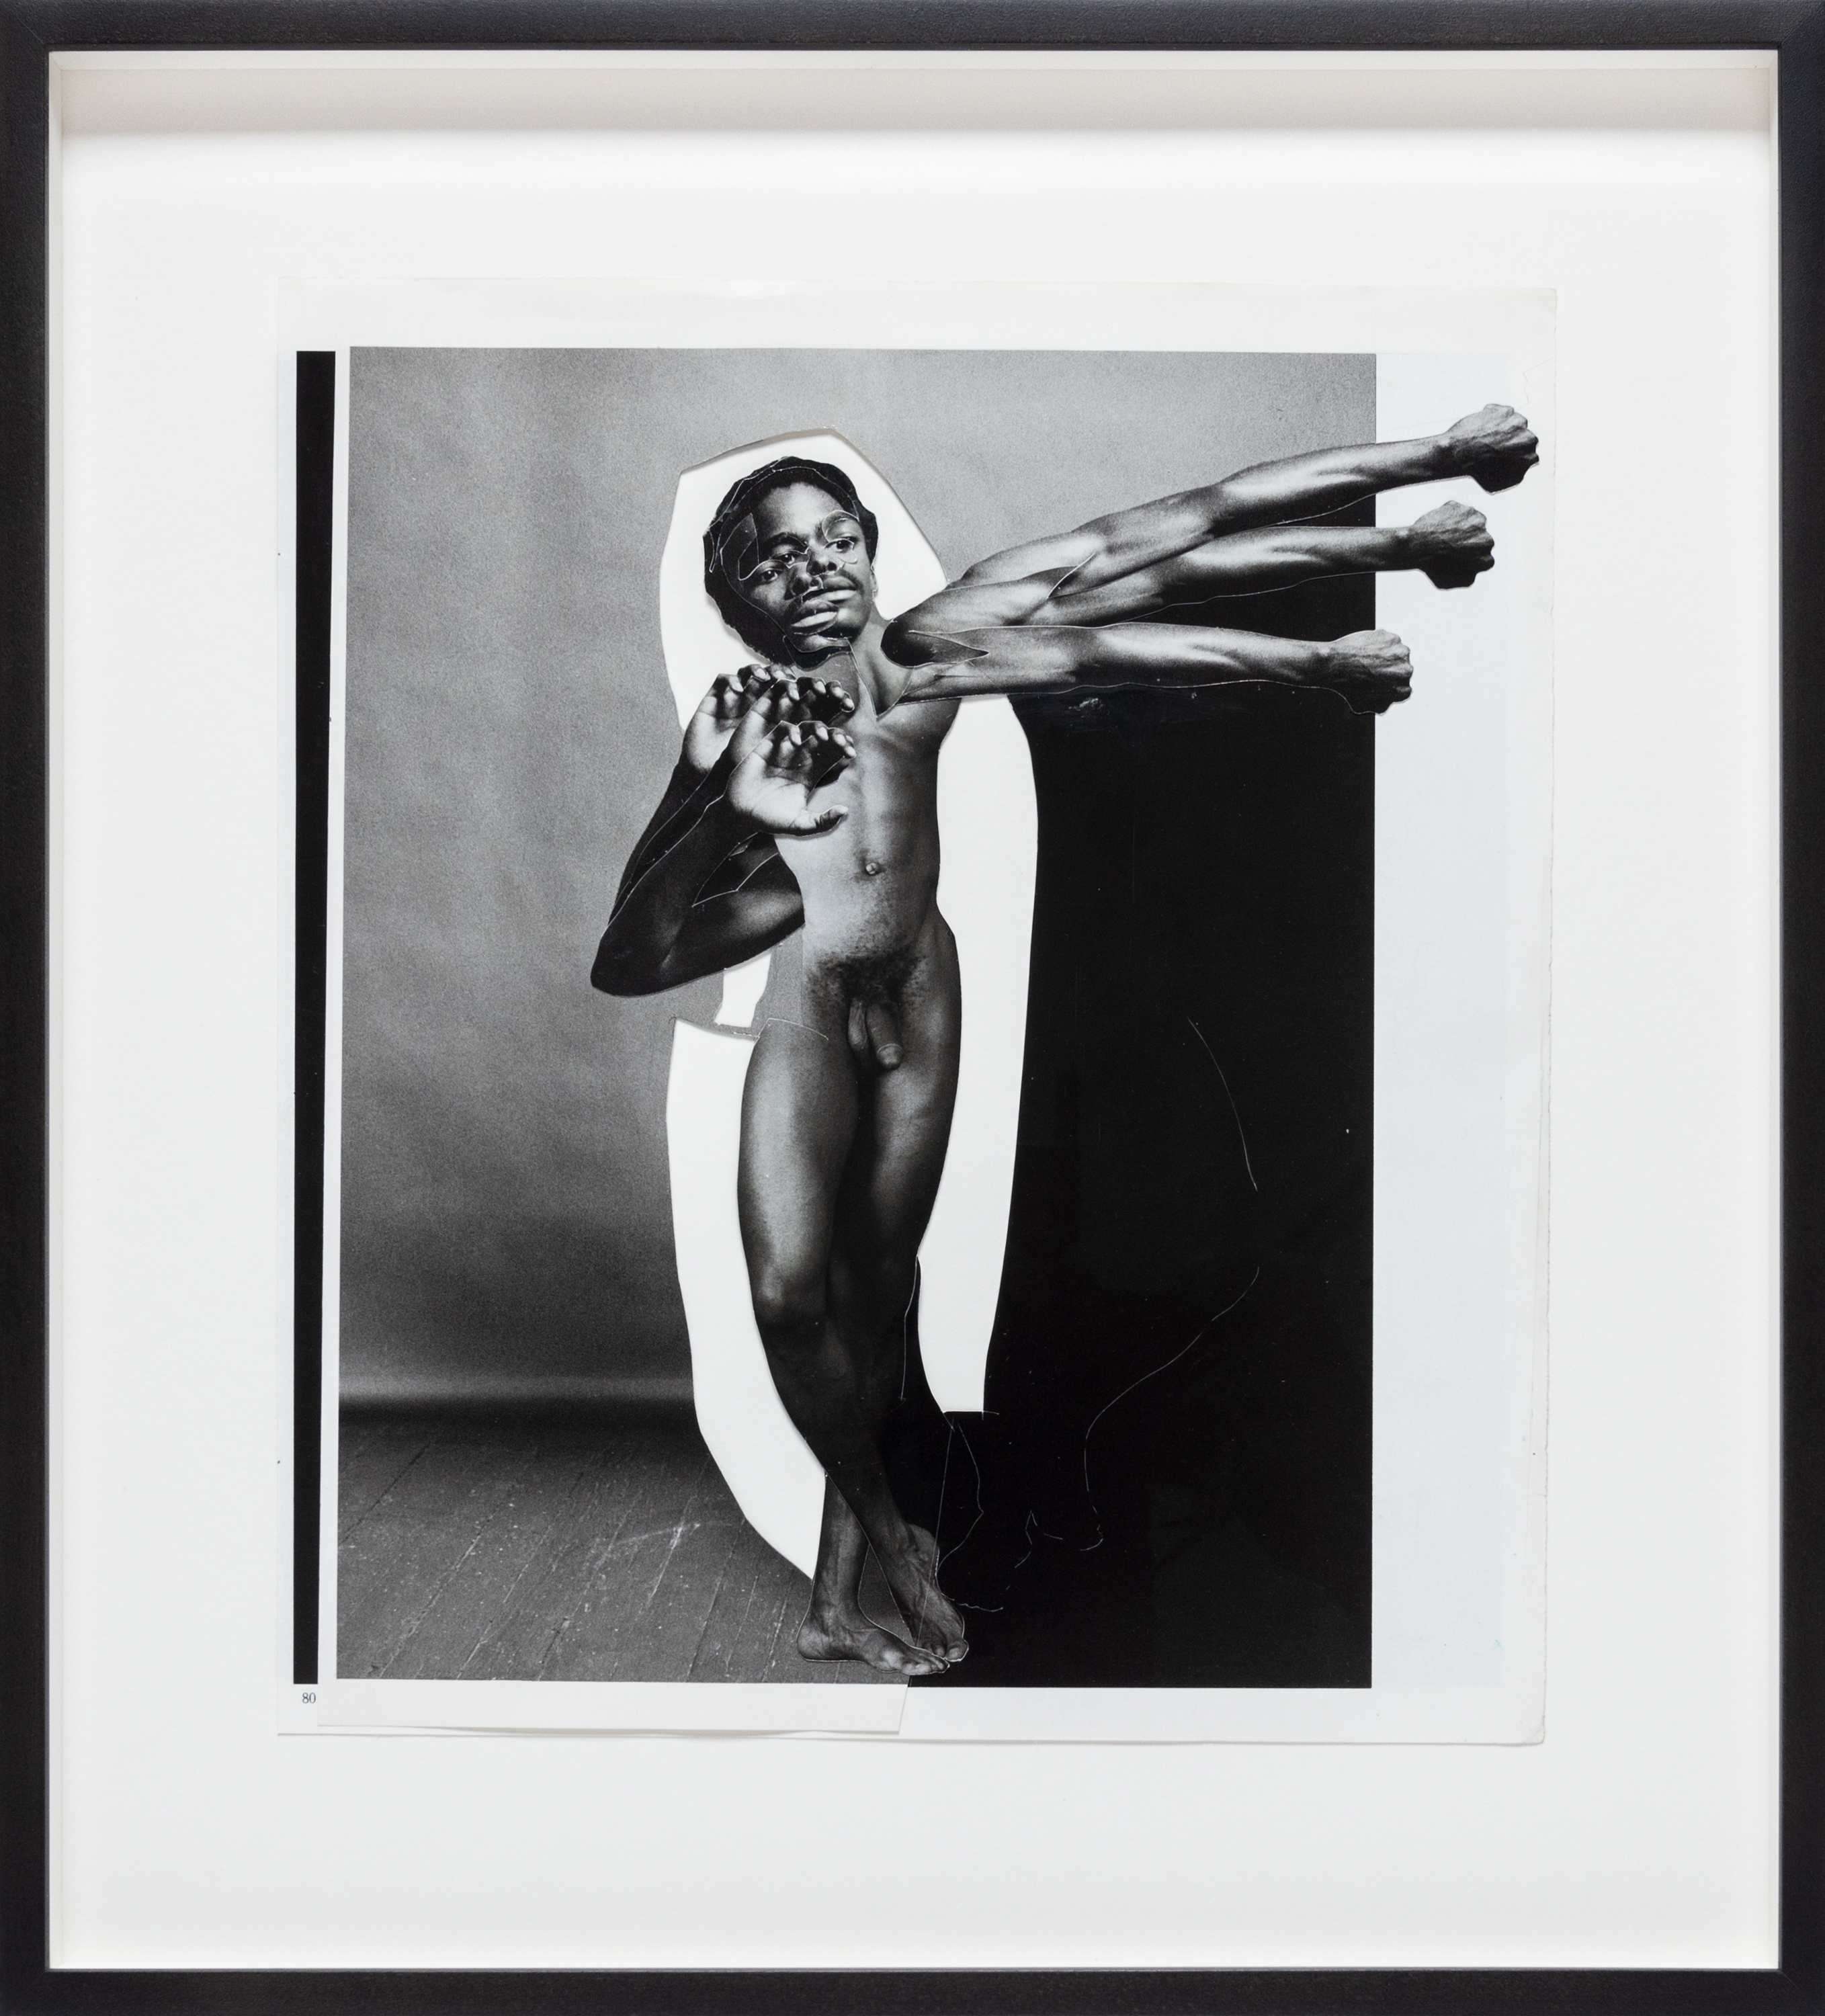 A color image of a black and white collage framed in black depicting a nude figure with multiple arms posing